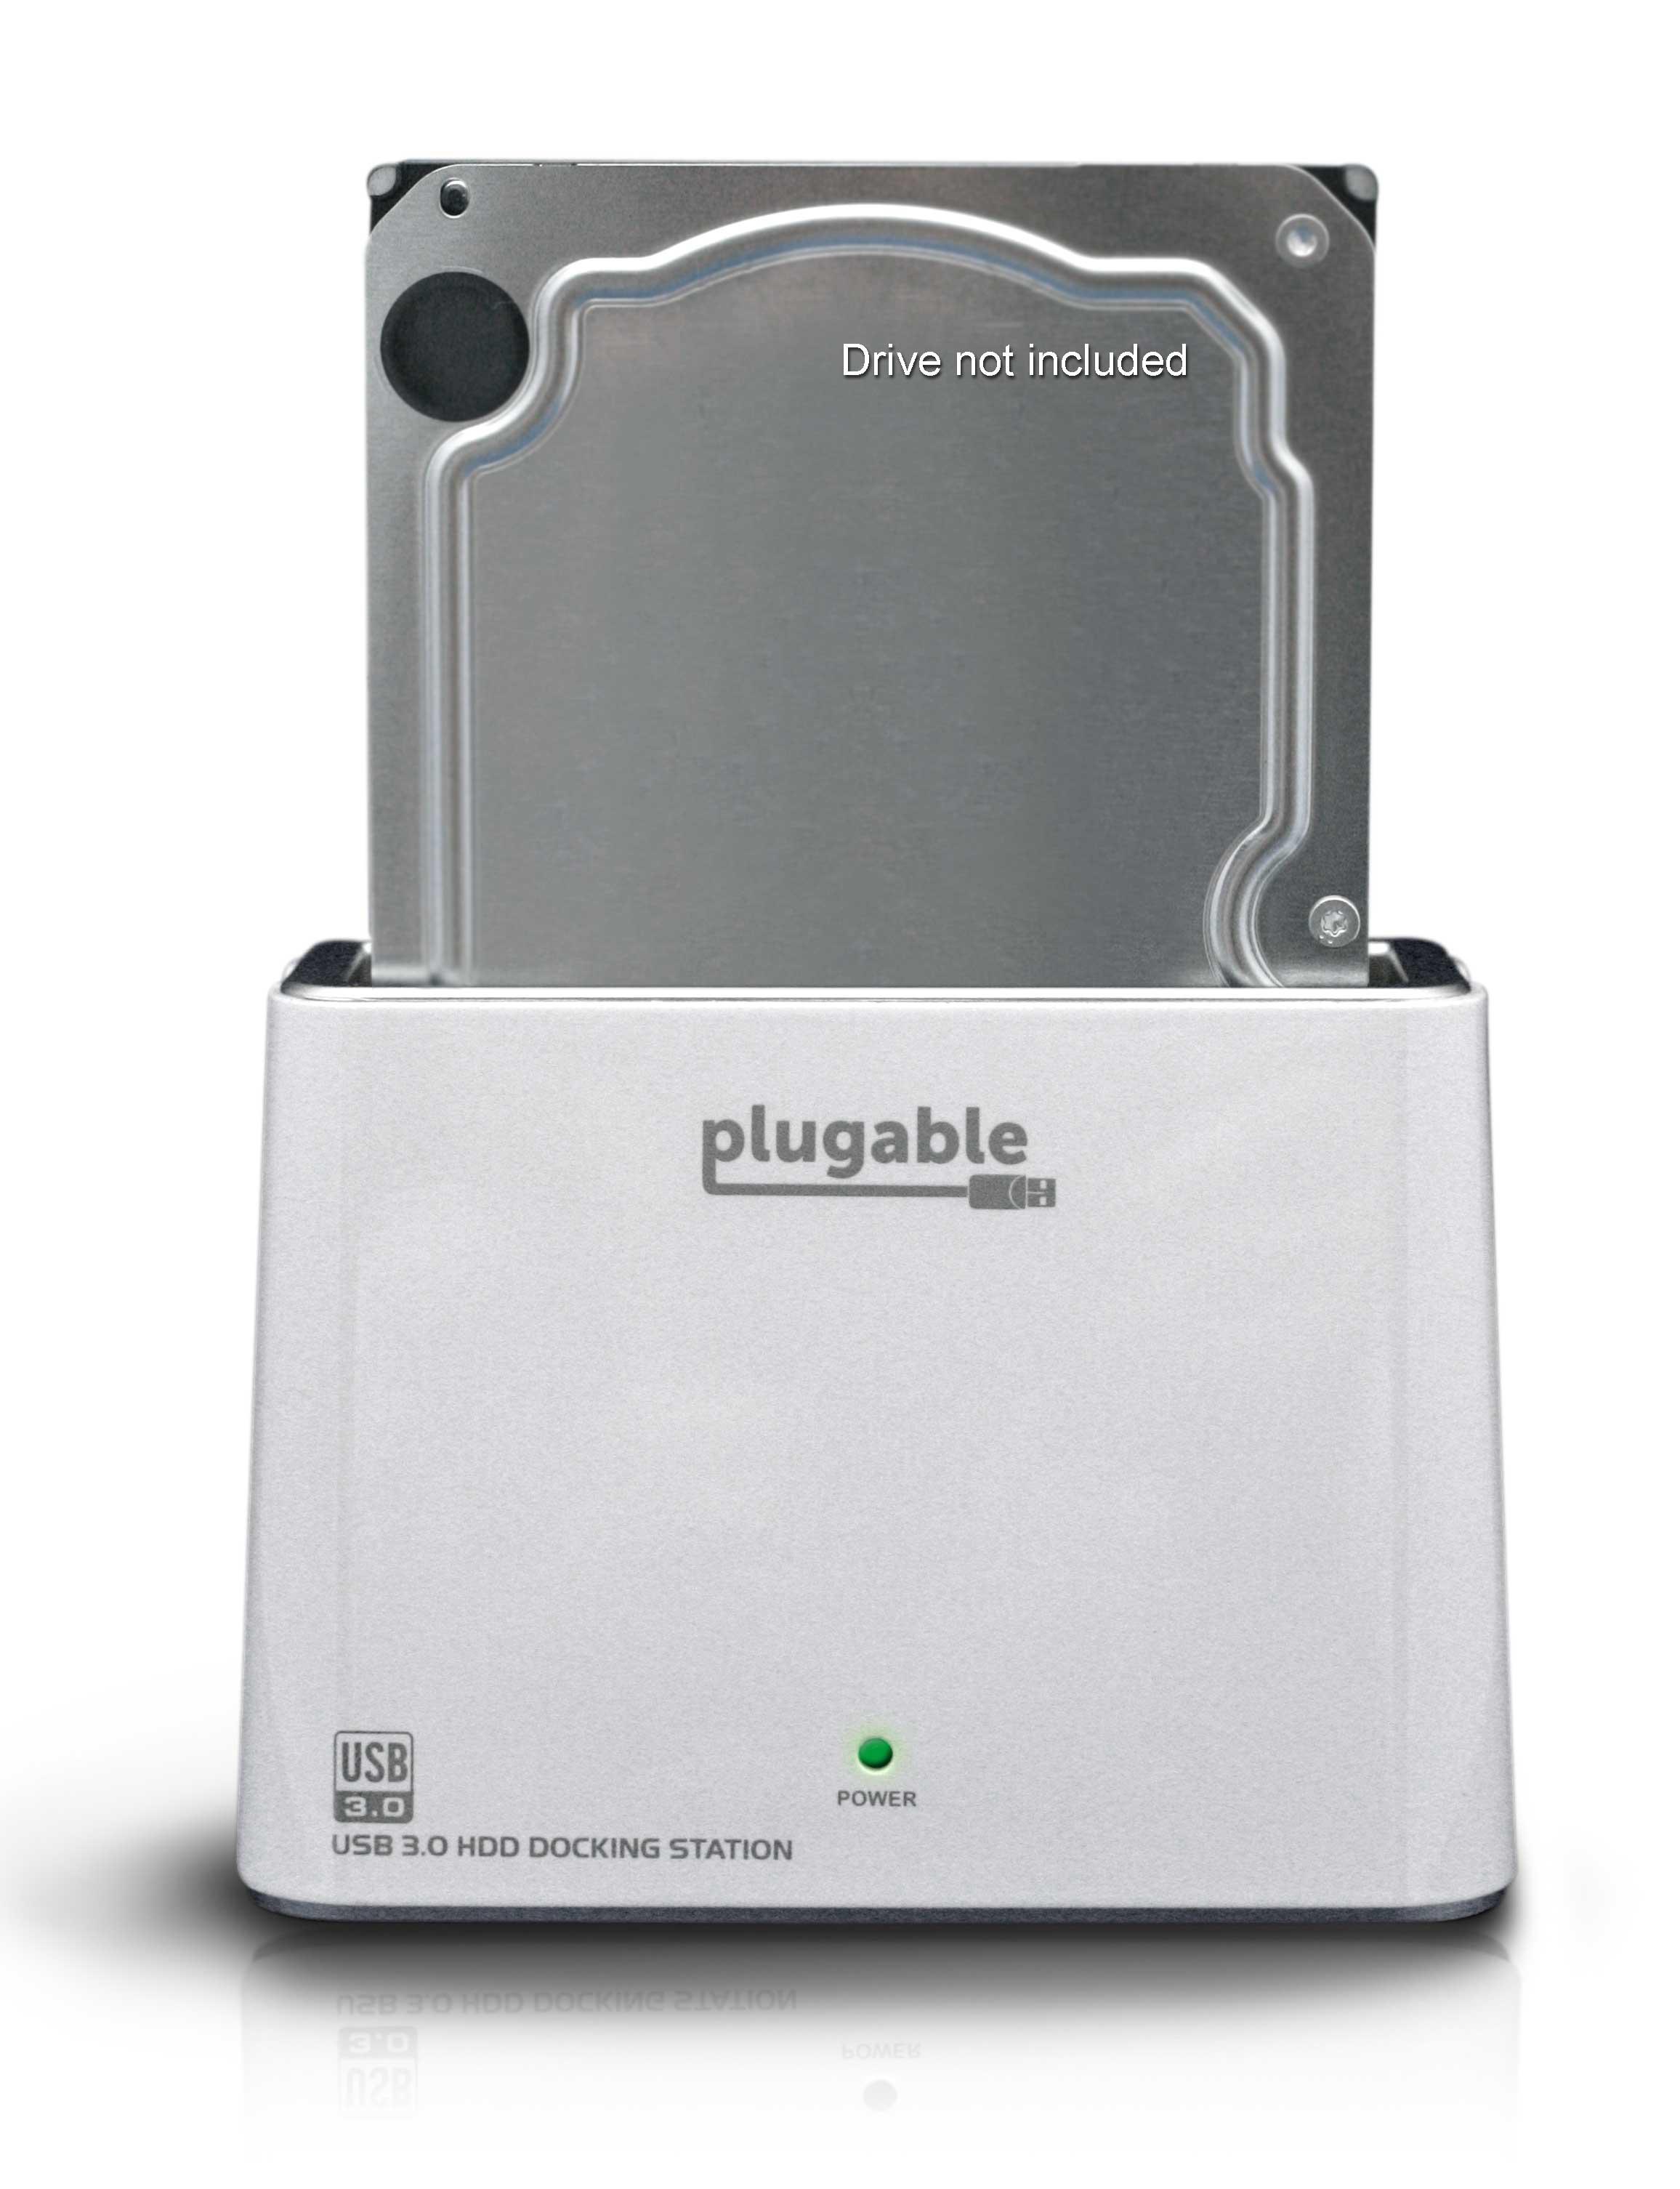 Plugable U3 SATA vertical dock with hard drive installed